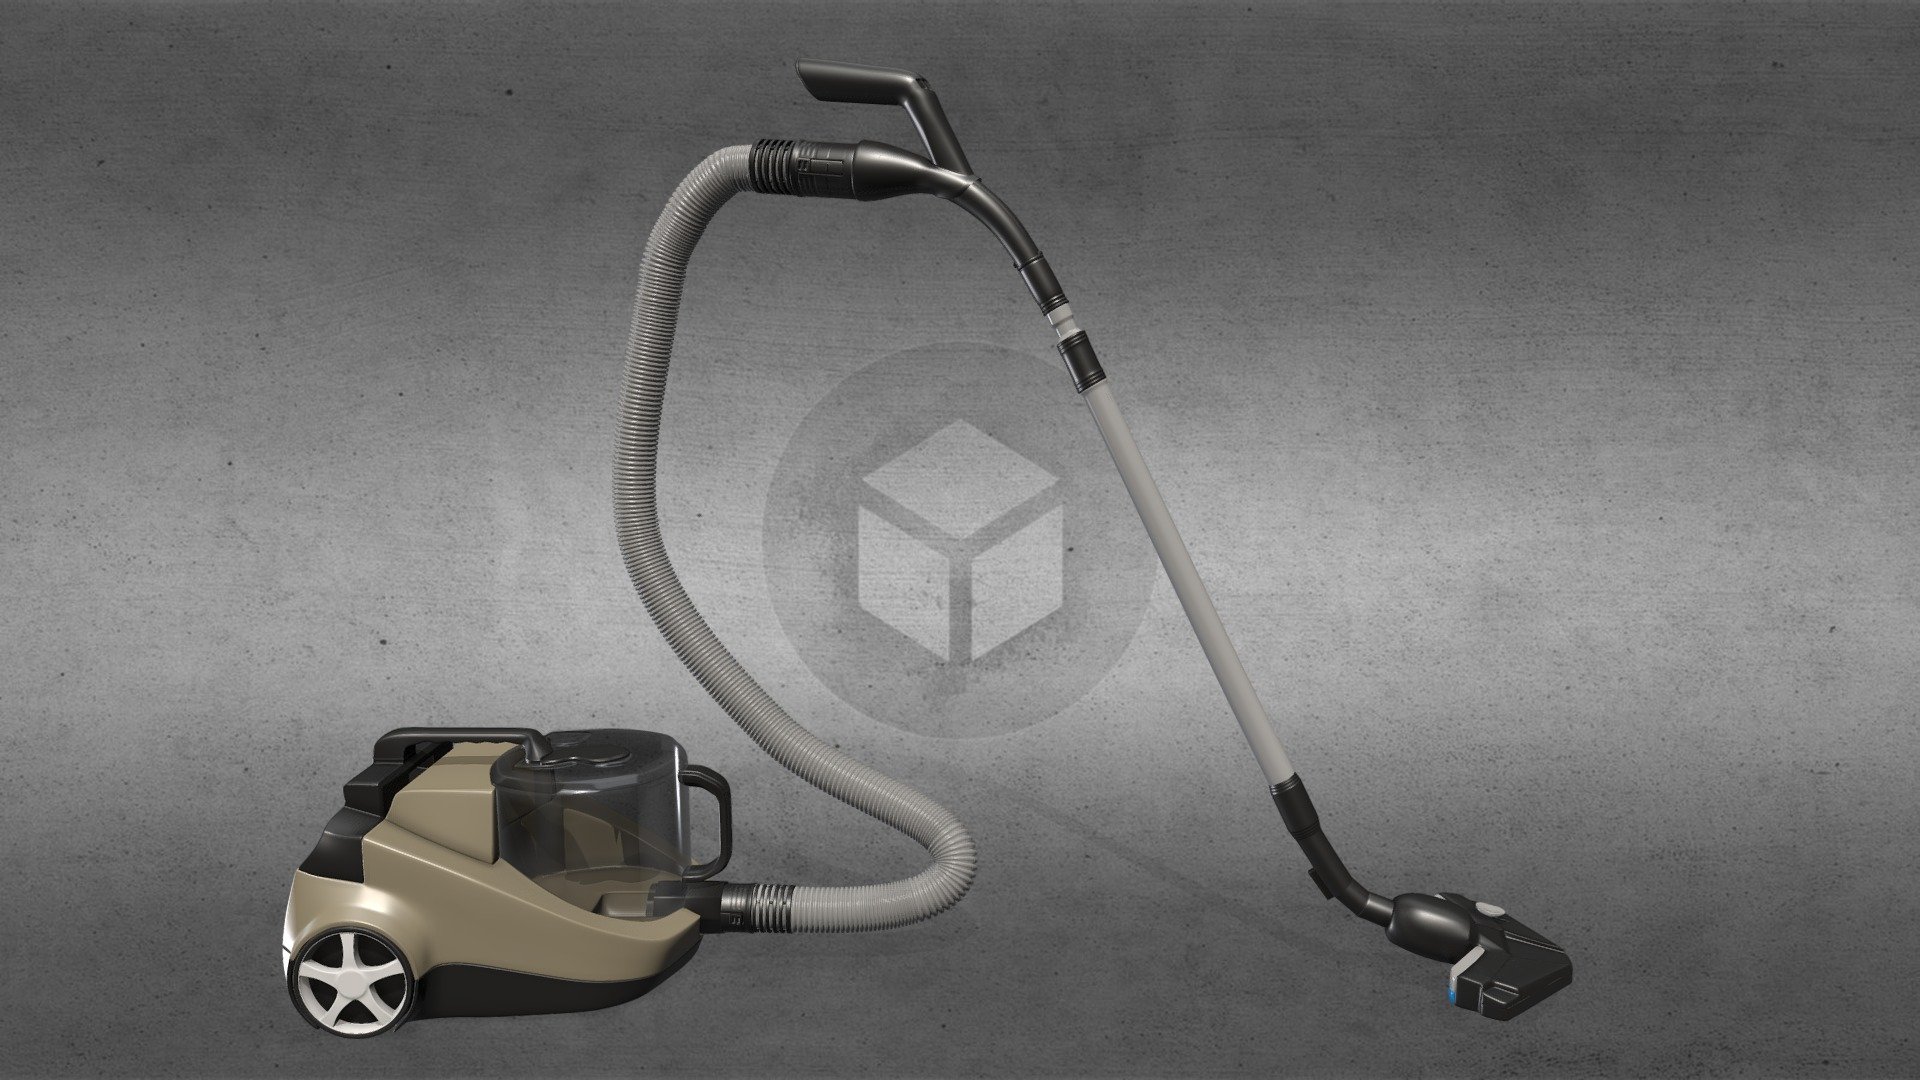 Vacuum cleaner 3D model made in 3ds max 3d model